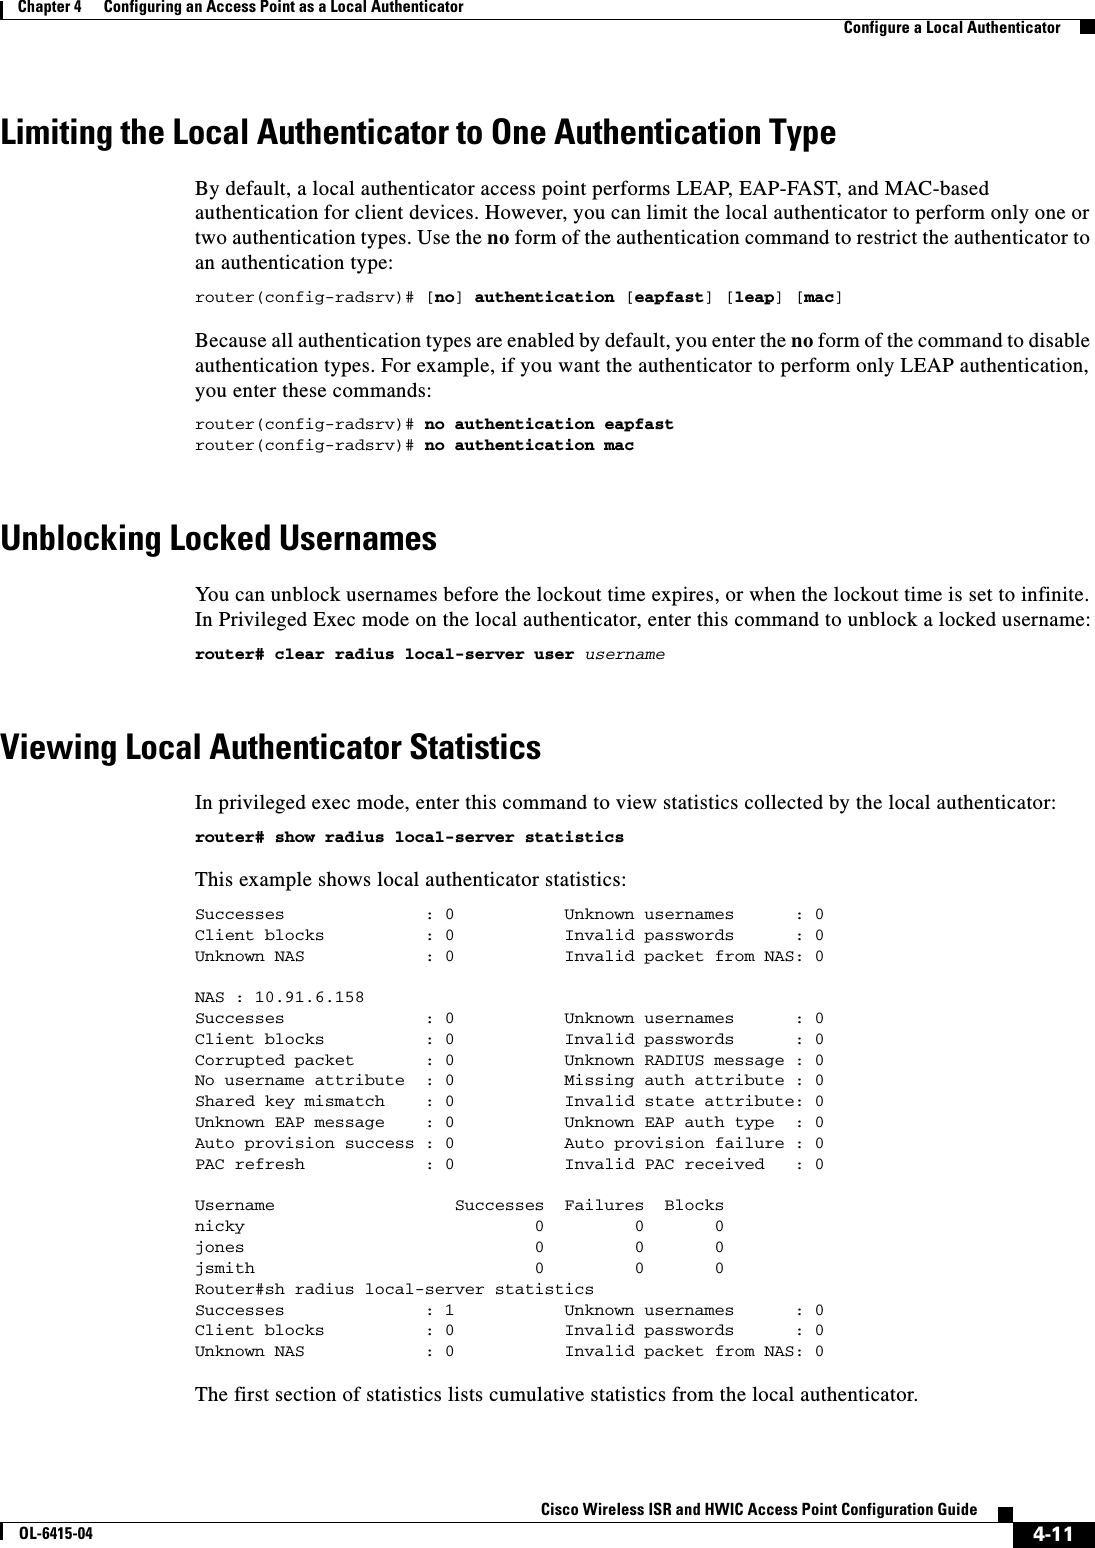  4-11Cisco Wireless ISR and HWIC Access Point Configuration GuideOL-6415-04Chapter 4      Configuring an Access Point as a Local Authenticator  Configure a Local AuthenticatorLimiting the Local Authenticator to One Authentication TypeBy default, a local authenticator access point performs LEAP, EAP-FAST, and MAC-based authentication for client devices. However, you can limit the local authenticator to perform only one or two authentication types. Use the no form of the authentication command to restrict the authenticator to an authentication type:router(config-radsrv)# [no] authentication [eapfast] [leap] [mac] Because all authentication types are enabled by default, you enter the no form of the command to disable authentication types. For example, if you want the authenticator to perform only LEAP authentication, you enter these commands:router(config-radsrv)# no authentication eapfast router(config-radsrv)# no authentication mac Unblocking Locked UsernamesYou  c a n  u nb l oc k u s e r n a m es  be f o r e  t he  lo c k o ut   ti me  exp i r e s ,   o r   wh e n  t h e  l oc k ou t  t im e i s   se t  to   in fin i te .  In Privileged Exec mode on the local authenticator, enter this command to unblock a locked username:router# clear radius local-server user username Viewing Local Authenticator StatisticsIn privileged exec mode, enter this command to view statistics collected by the local authenticator:router# show radius local-server statistics This example shows local authenticator statistics:Successes              : 0           Unknown usernames      : 0Client blocks          : 0           Invalid passwords      : 0Unknown NAS            : 0           Invalid packet from NAS: 0NAS : 10.91.6.158Successes              : 0           Unknown usernames      : 0Client blocks          : 0           Invalid passwords      : 0Corrupted packet       : 0           Unknown RADIUS message : 0No username attribute  : 0           Missing auth attribute : 0Shared key mismatch    : 0           Invalid state attribute: 0Unknown EAP message    : 0           Unknown EAP auth type  : 0Auto provision success : 0           Auto provision failure : 0PAC refresh            : 0           Invalid PAC received   : 0Username                  Successes  Failures  Blocksnicky                             0         0       0jones                             0         0       0jsmith                            0         0       0Router#sh radius local-server statisticsSuccesses              : 1           Unknown usernames      : 0Client blocks          : 0           Invalid passwords      : 0Unknown NAS            : 0           Invalid packet from NAS: 0 The first section of statistics lists cumulative statistics from the local authenticator. 